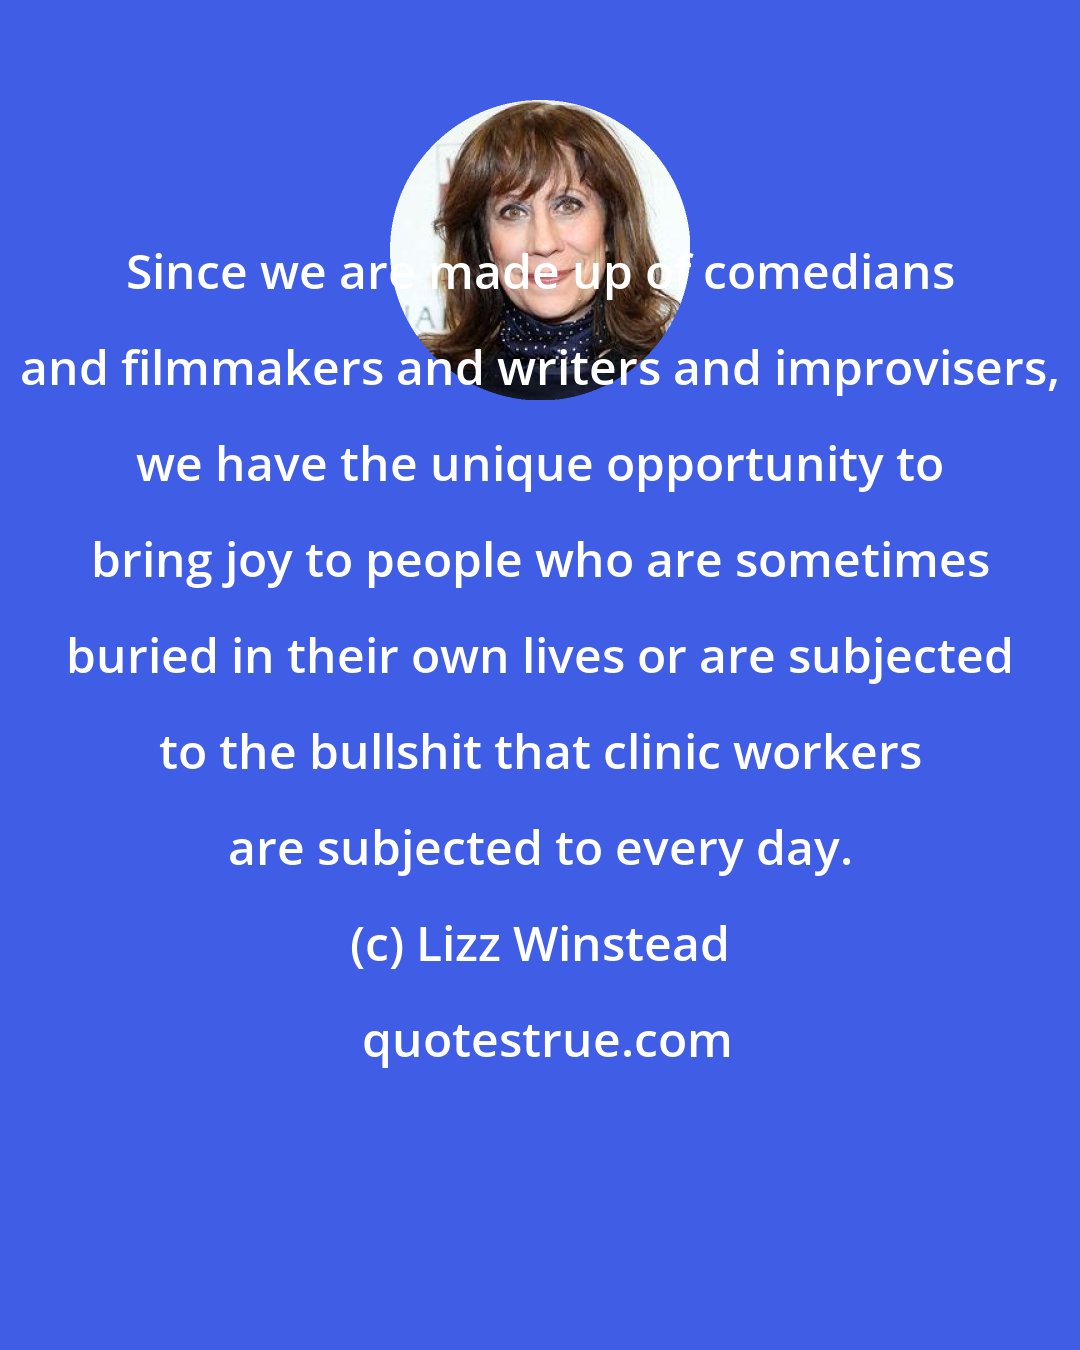 Lizz Winstead: Since we are made up of comedians and filmmakers and writers and improvisers, we have the unique opportunity to bring joy to people who are sometimes buried in their own lives or are subjected to the bullshit that clinic workers are subjected to every day.